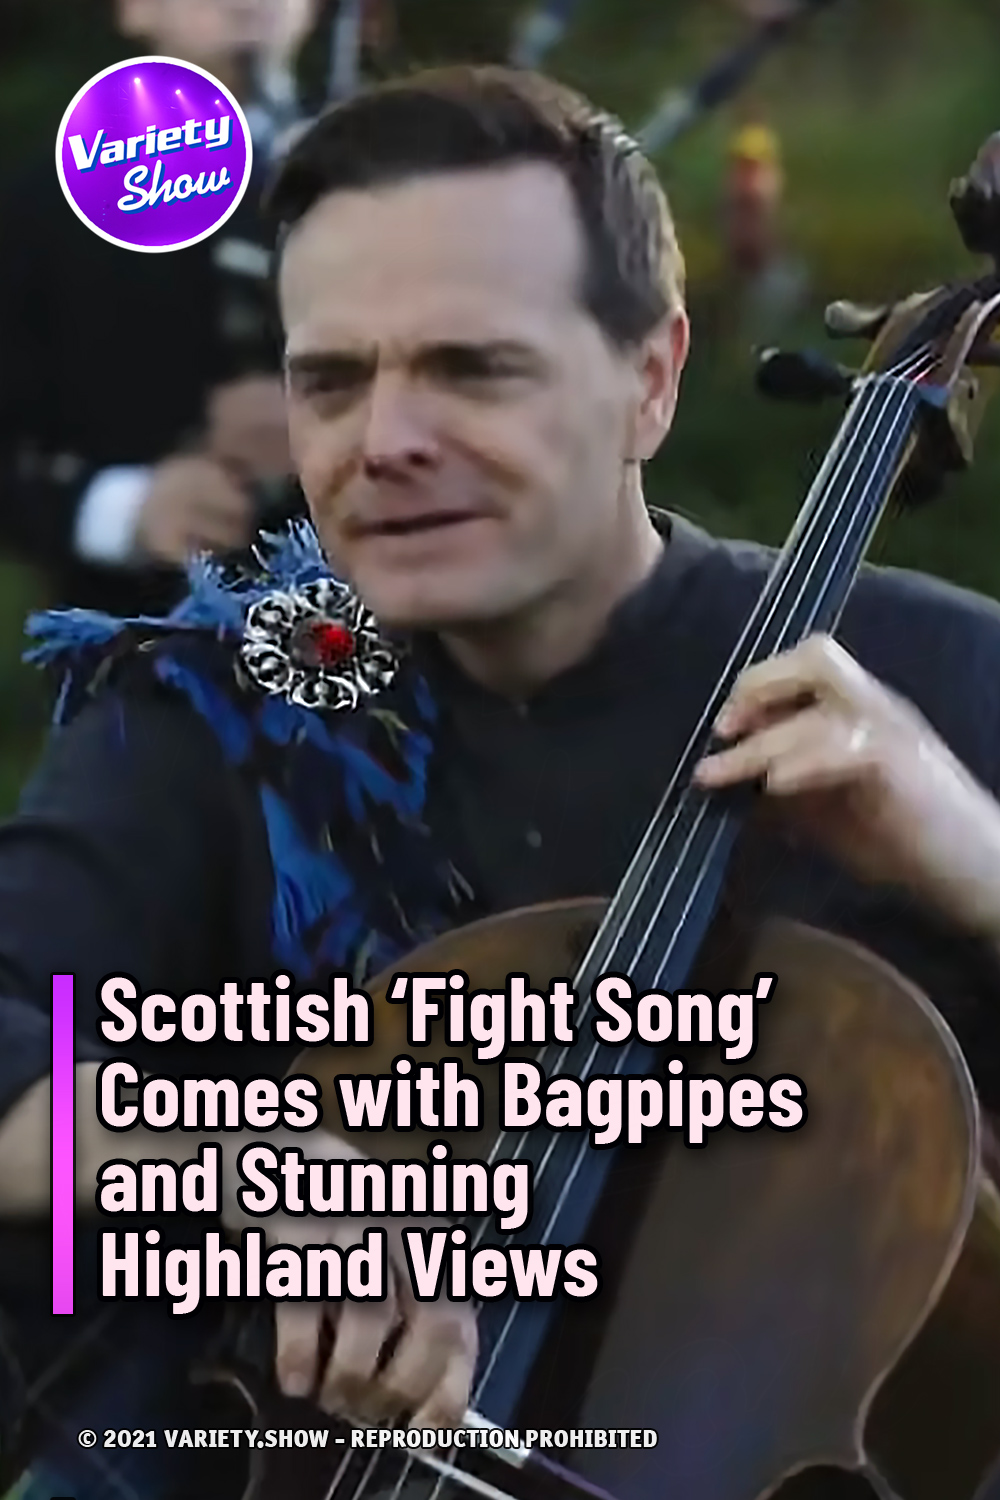 Scottish ‘Fight Song’ Comes with Bagpipes and Stunning Highland Views